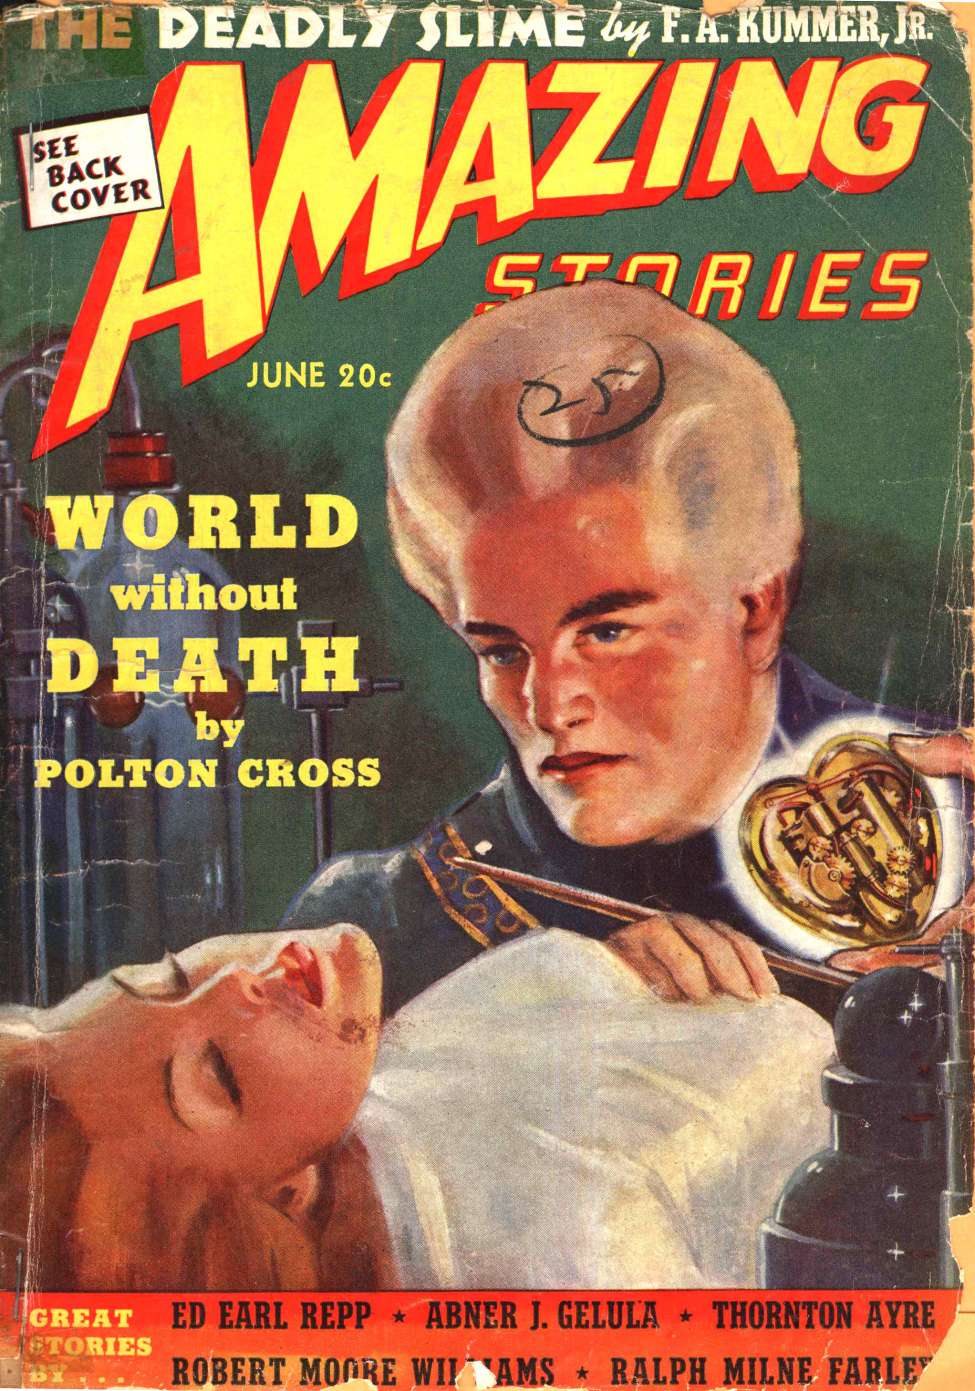 Book Cover For Amazing Stories v13 6 - World Without Death - John Russell Fearn